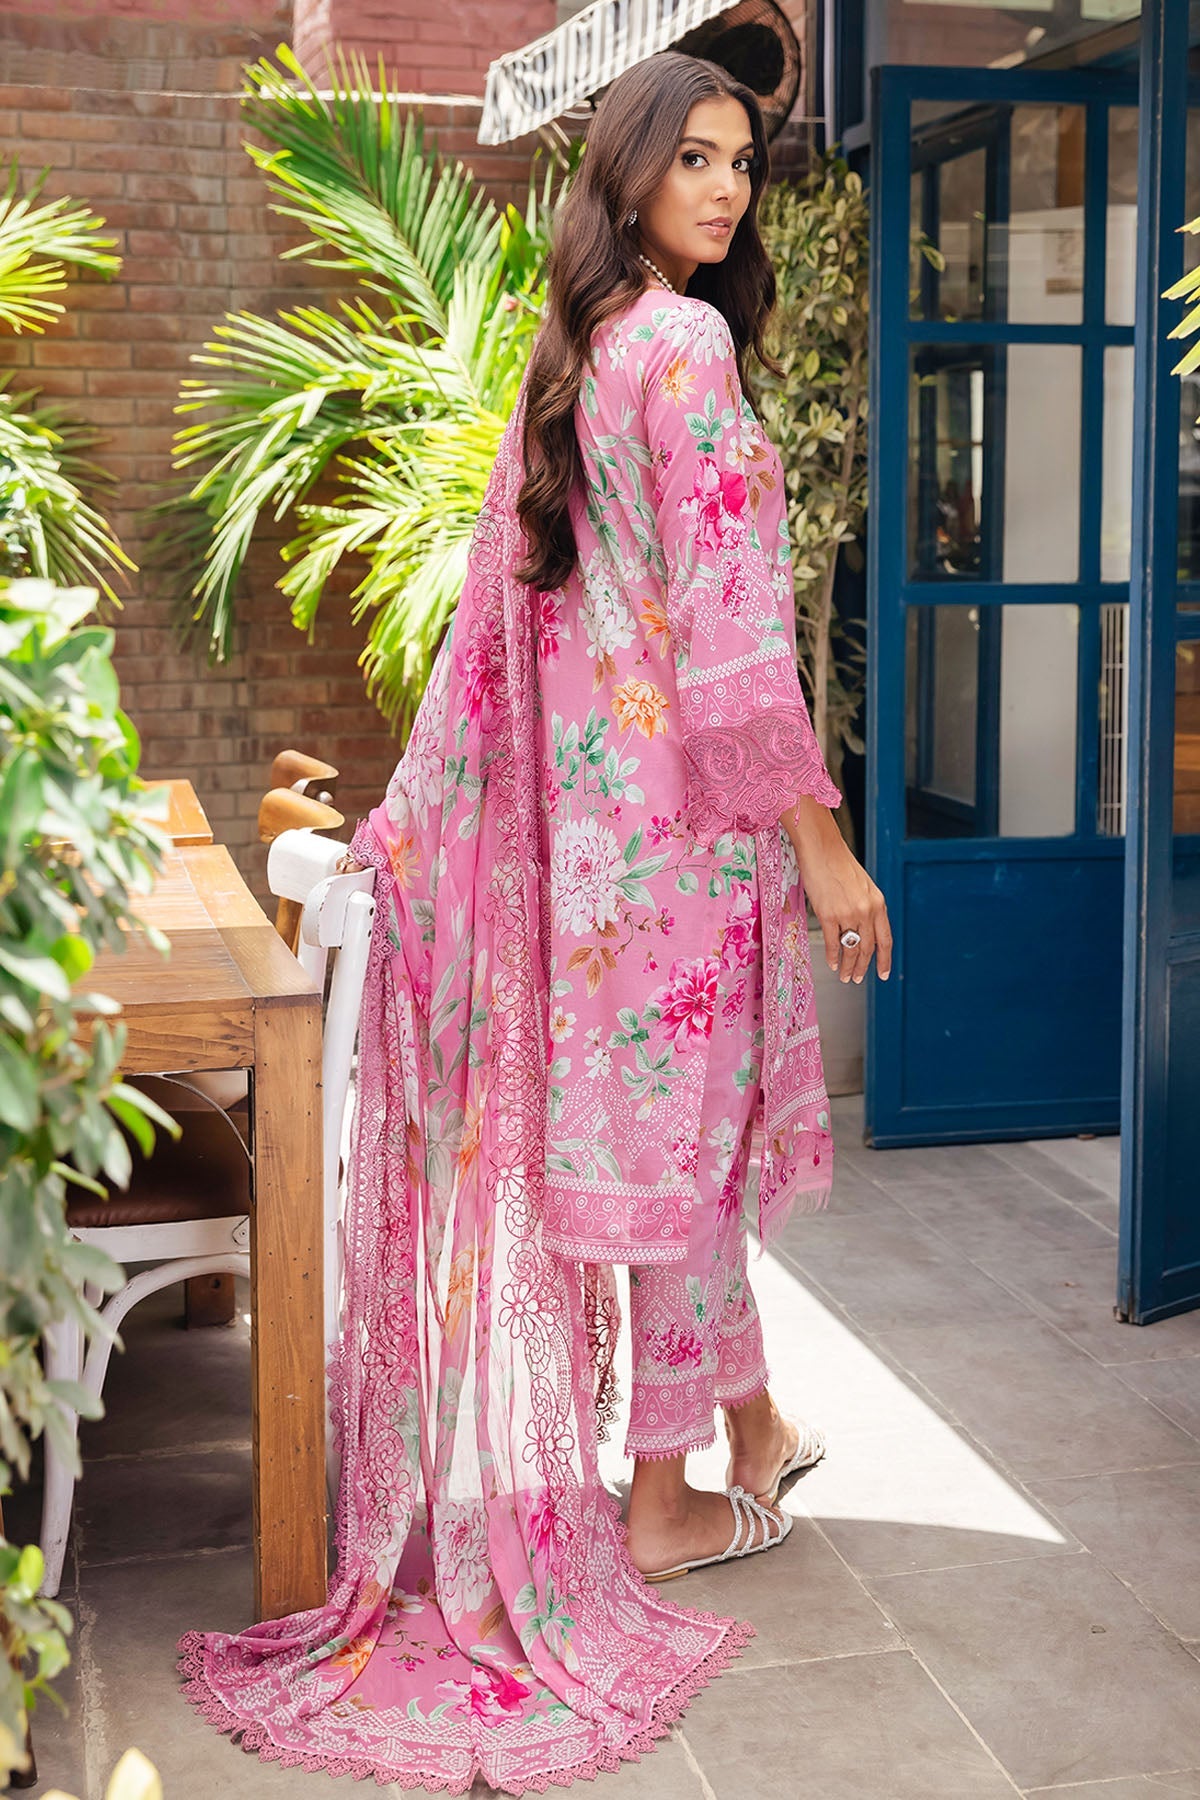 Shop Now, GL-01 - Glam Girl - Lawn Collection 2023 - Nureh - Shahana Collection UK - Wedding and Bridal Party Dresses - Eid edit 2023